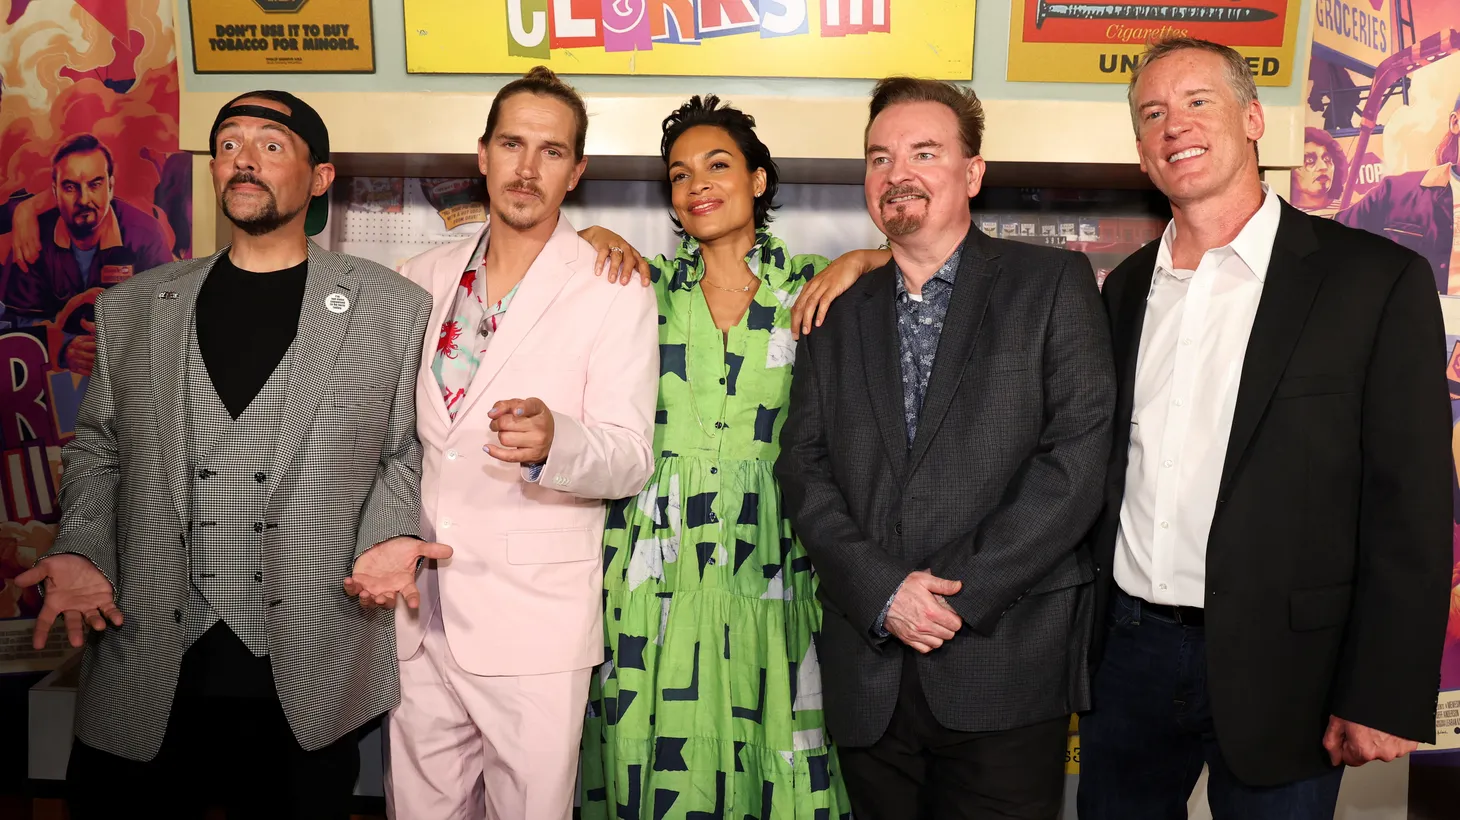 Director Kevin Smith (left) and cast members Jason Mewes, Rosario Dawson, Brian O'Halloran and Jeff Anderson attend a premiere for the film "Clerks III" in Los Angeles, on August 24, 2022.